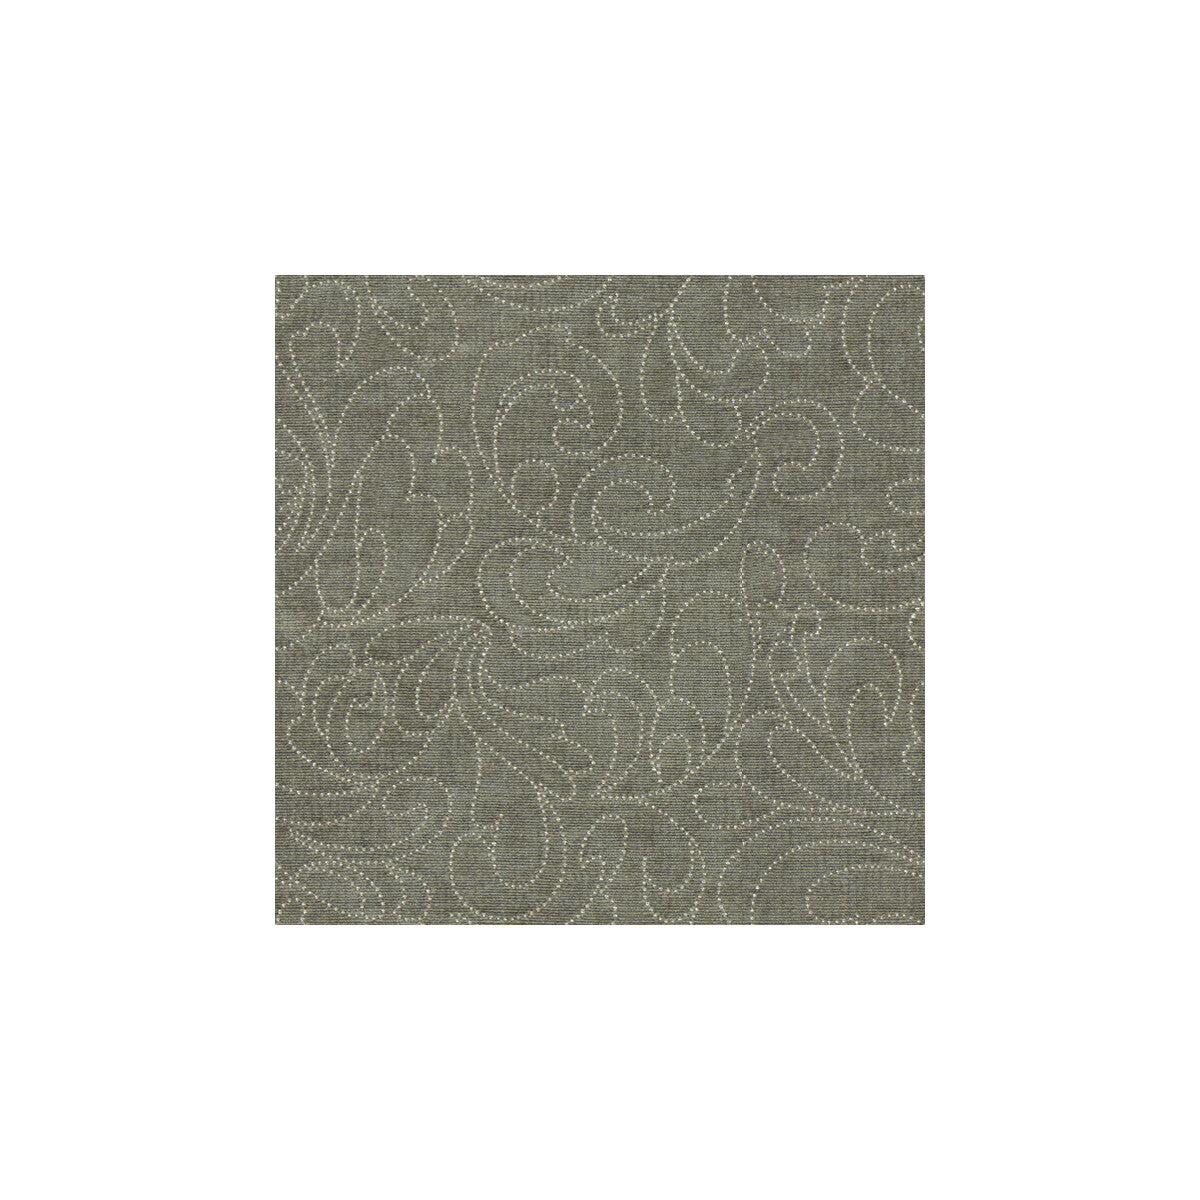 Hartwell fabric in gentle grey color - pattern 32478.11.0 - by Kravet Contract in the Candice Olson collection